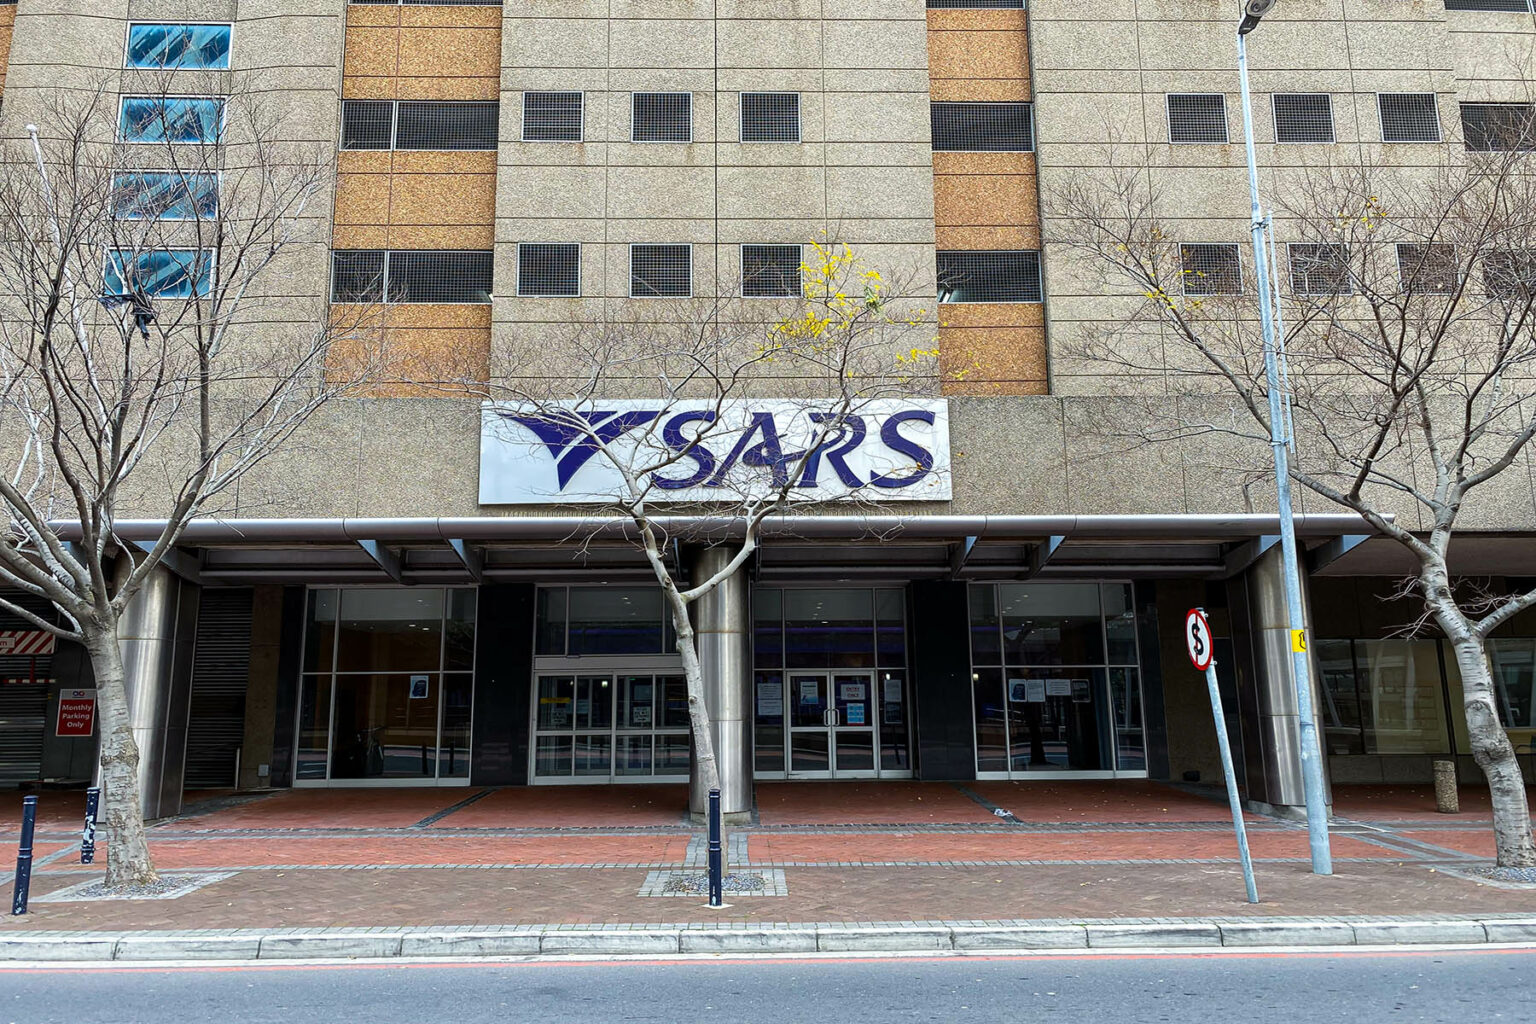 Exterior of the South African Revenue Services (SARS) in Cape Town